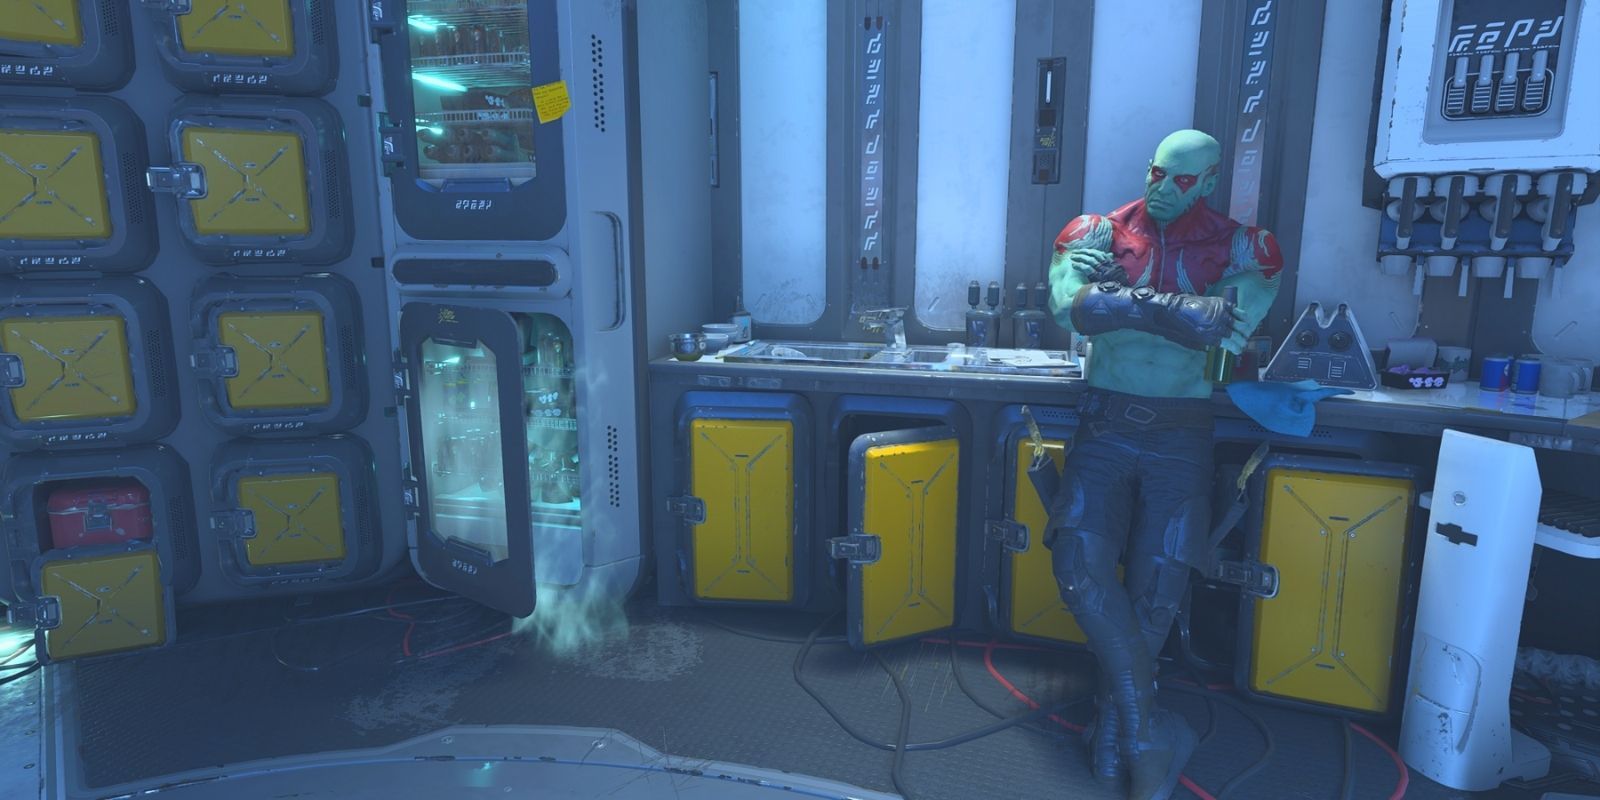 Drax The Destroyer leaning against a fridge in Marvel's Guardians of the Galaxy